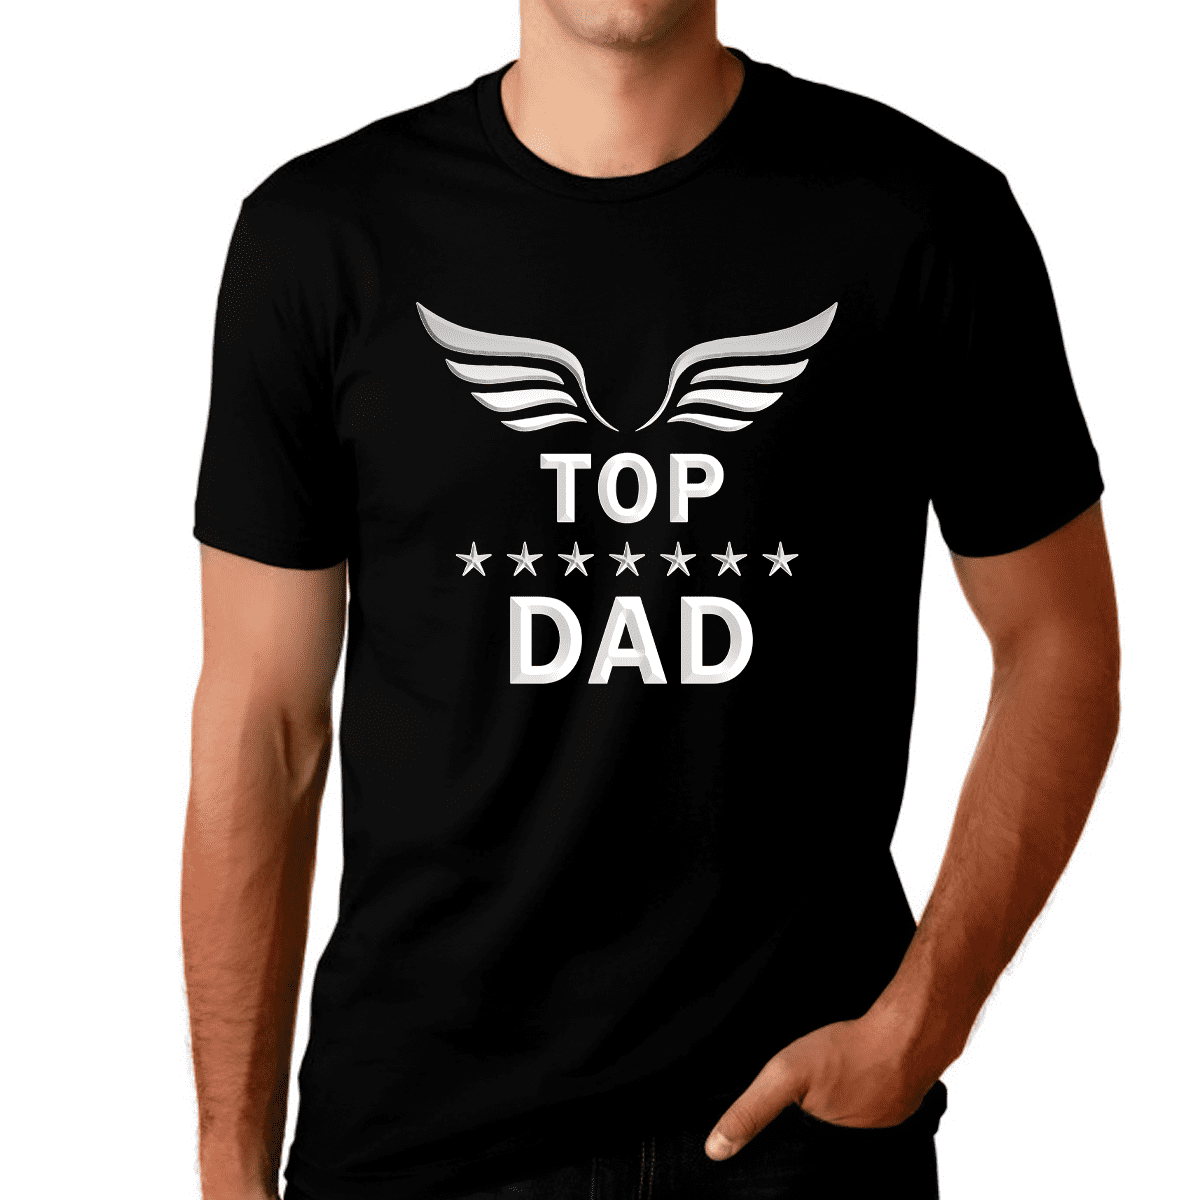 Top daddy. Daddy топ. Fat dad on the Shirt. Yes Daddy Shirt.